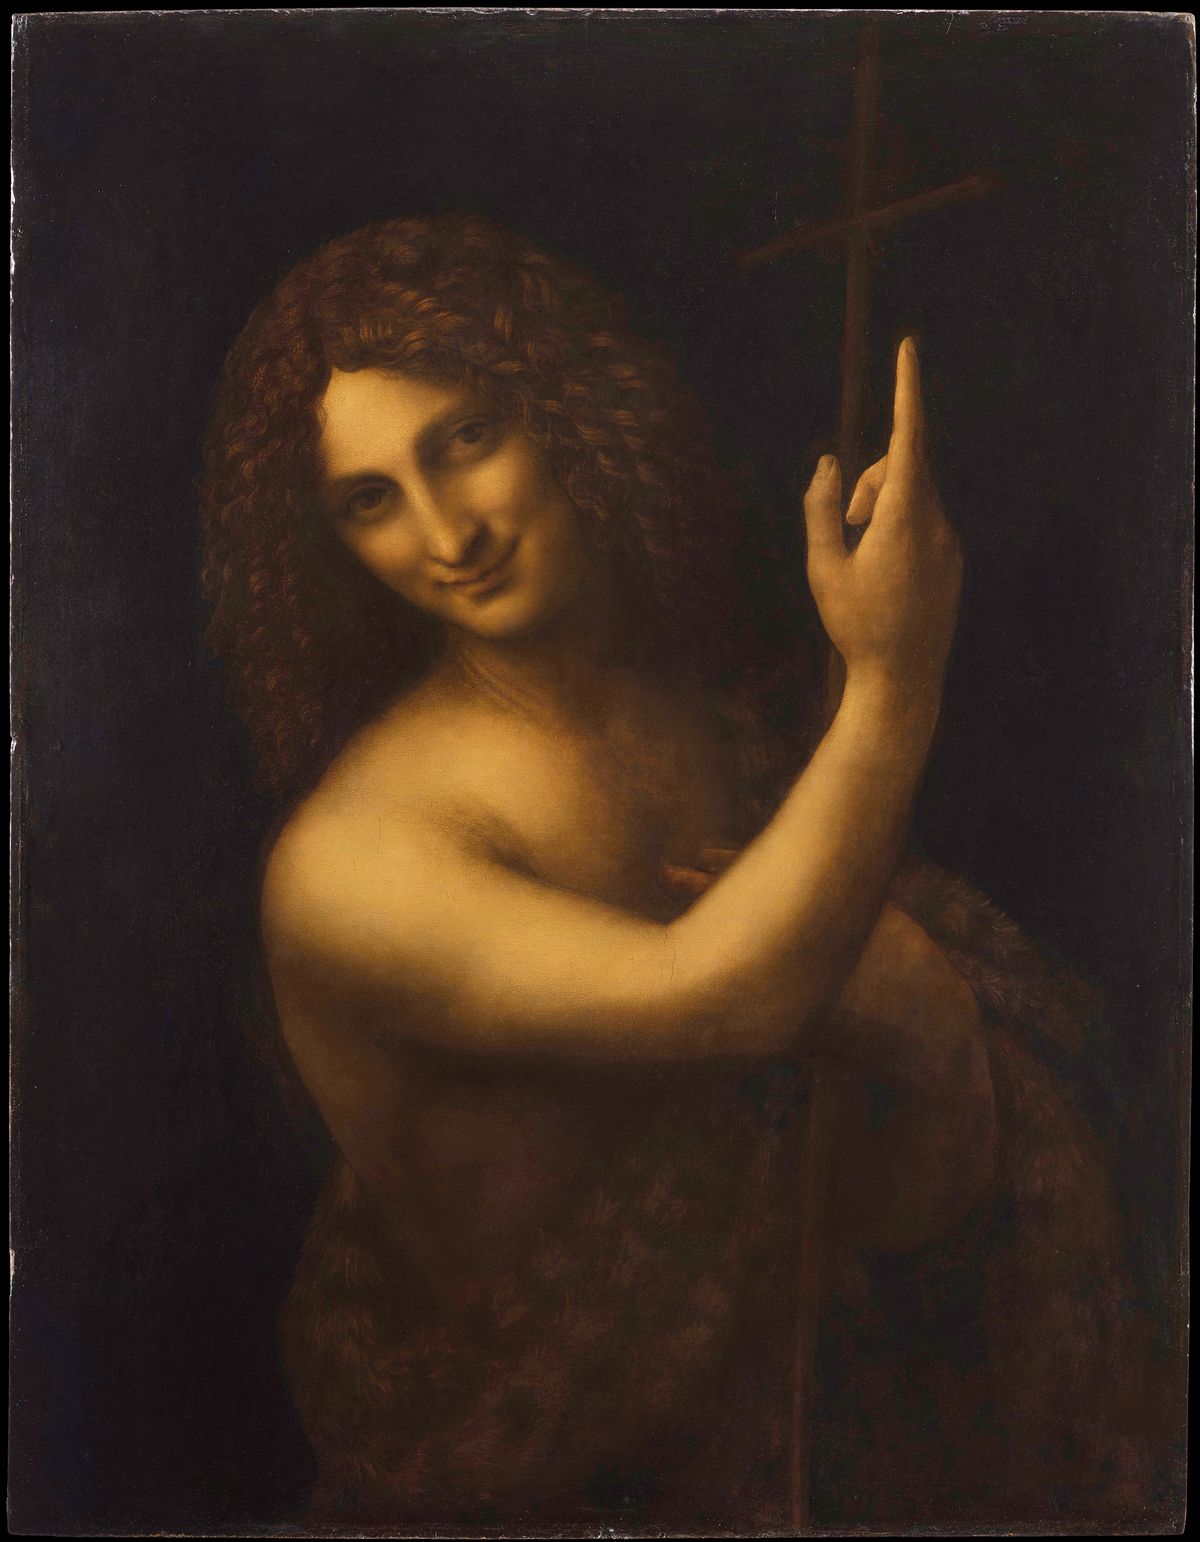 St John the Baptist, painted between 1513 and 1516, will be shown in the section of the exhibition titled "la vie" Image: courtesy of RMN-Grand Palais (Musée du Louvre). Photo © Michel Urtado